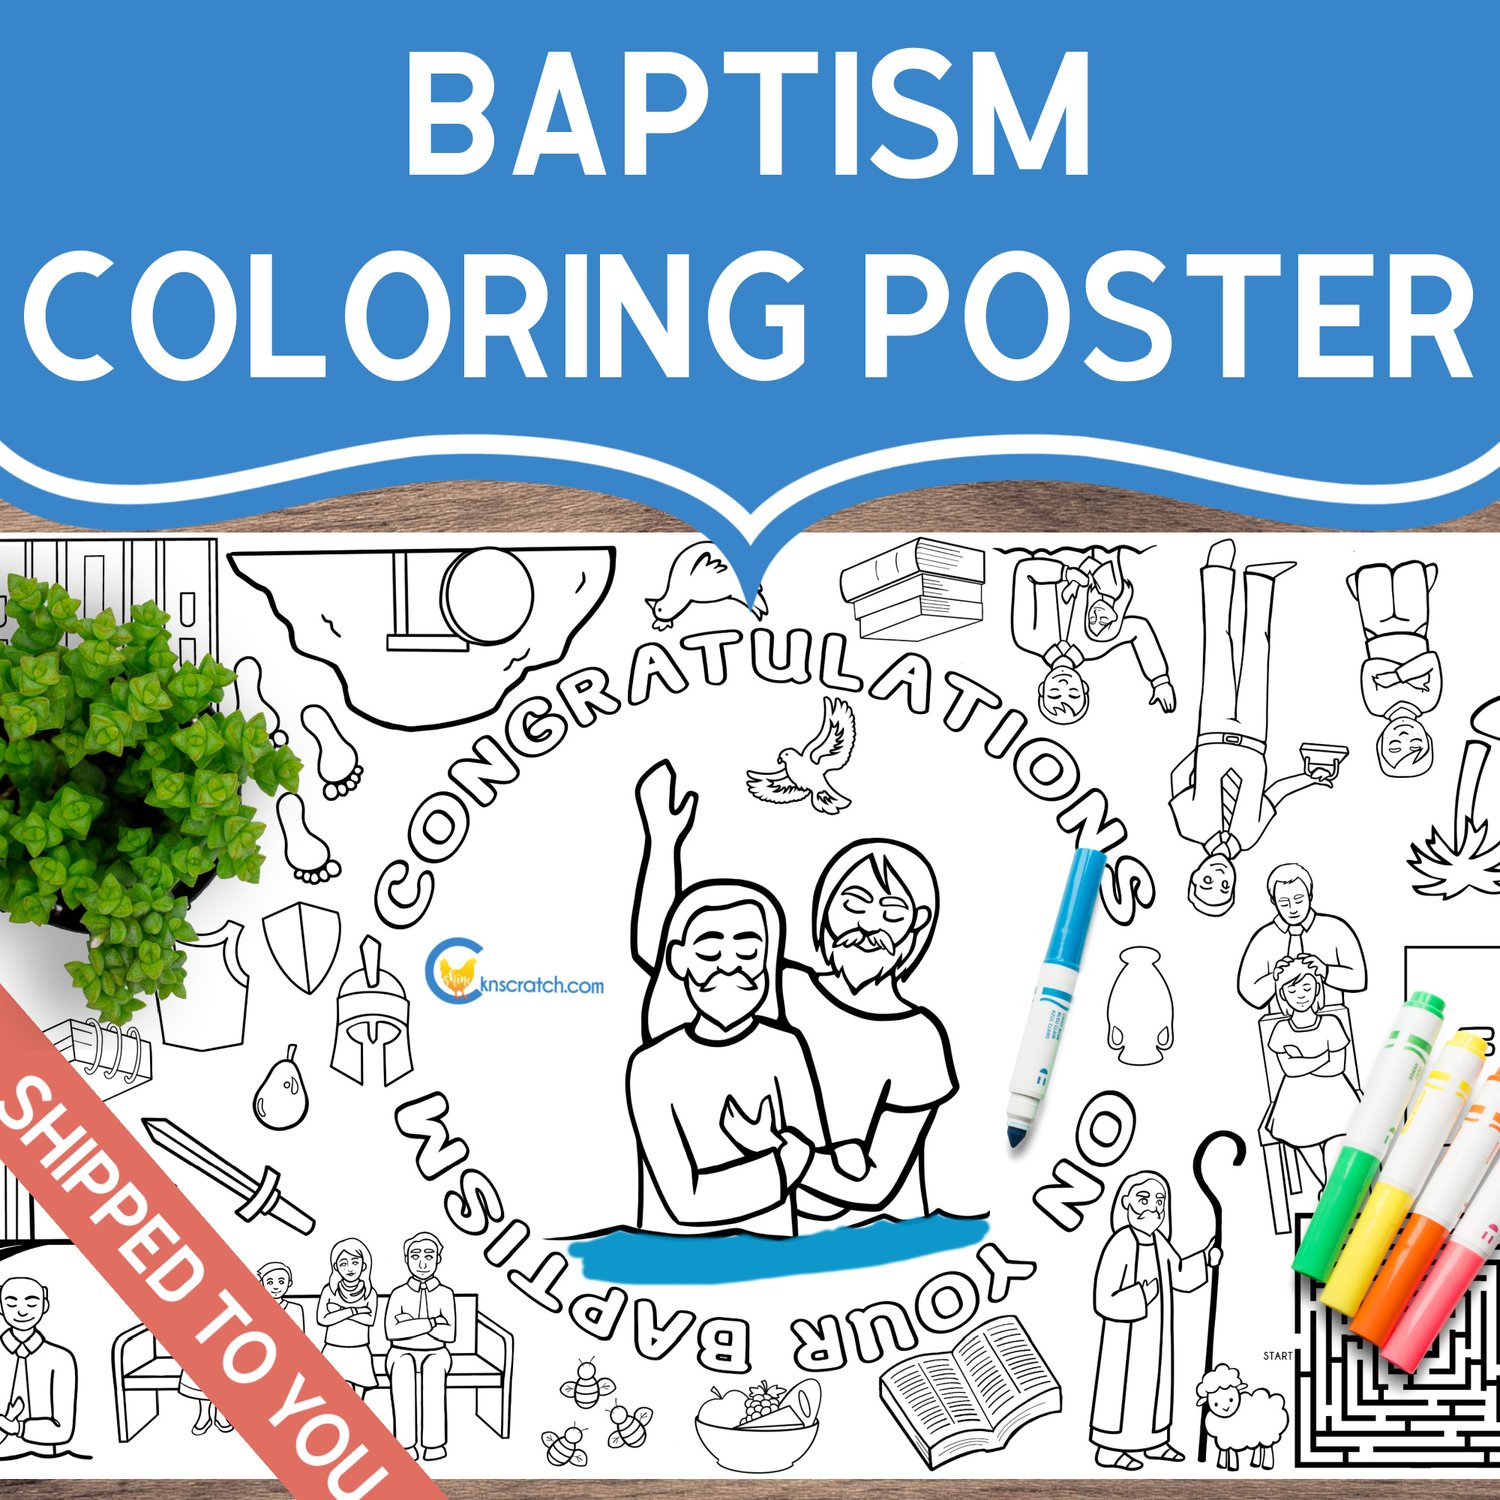 Baptism coloring poster â chicken scratch n sniff